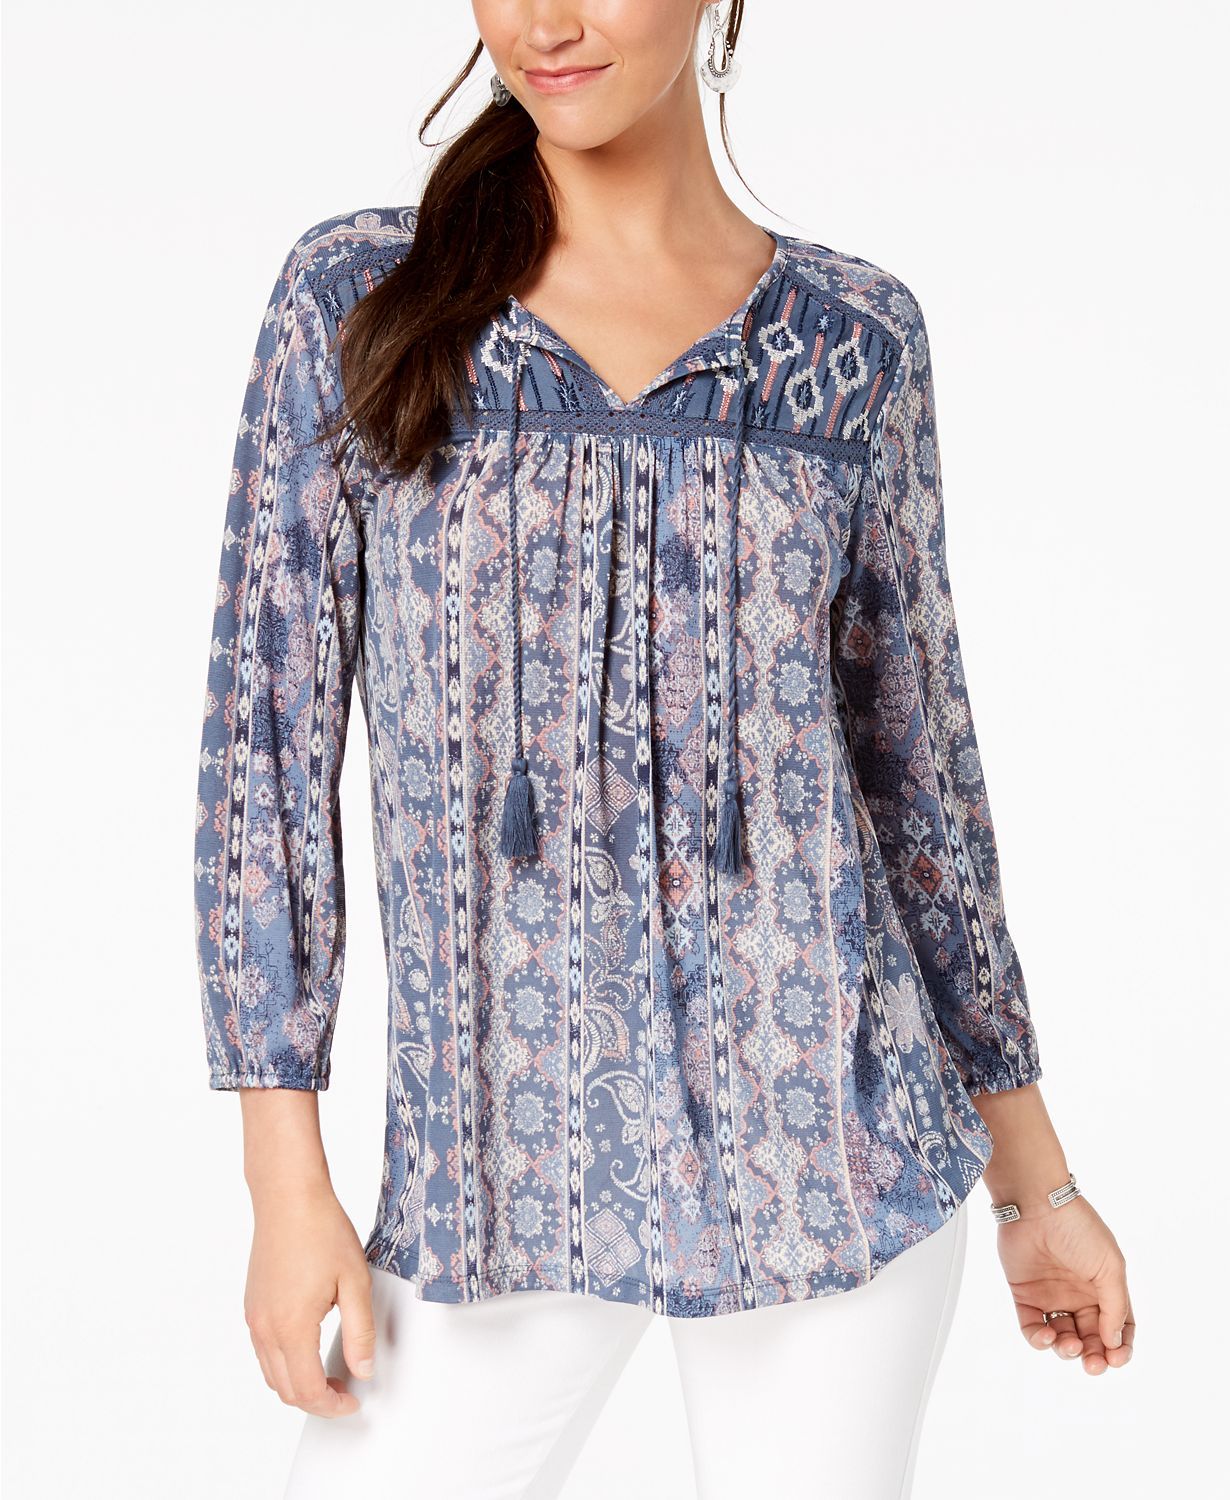 STYLE CO FLORAL-PRINT LACE PEASANT TOP NOMADI BLUE XS